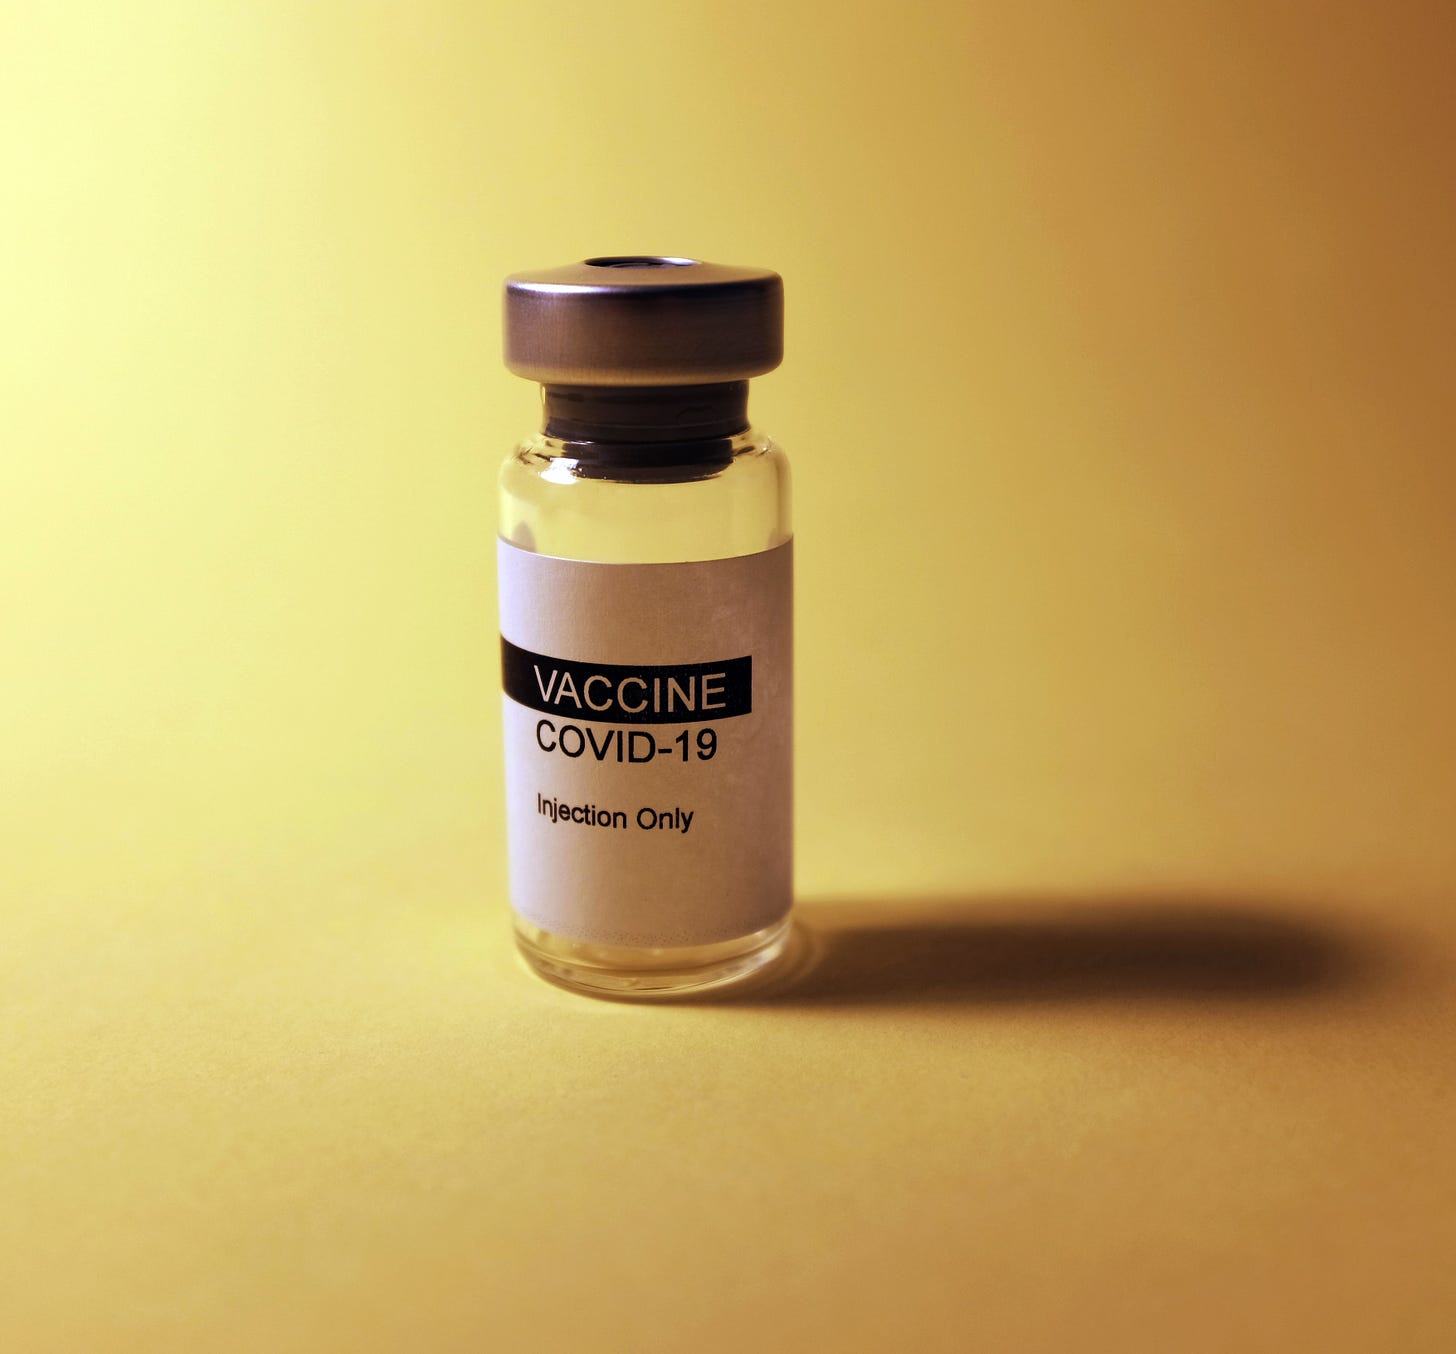 A glass vial labelled 'Vaccine Covid-19' with a light yellow background.